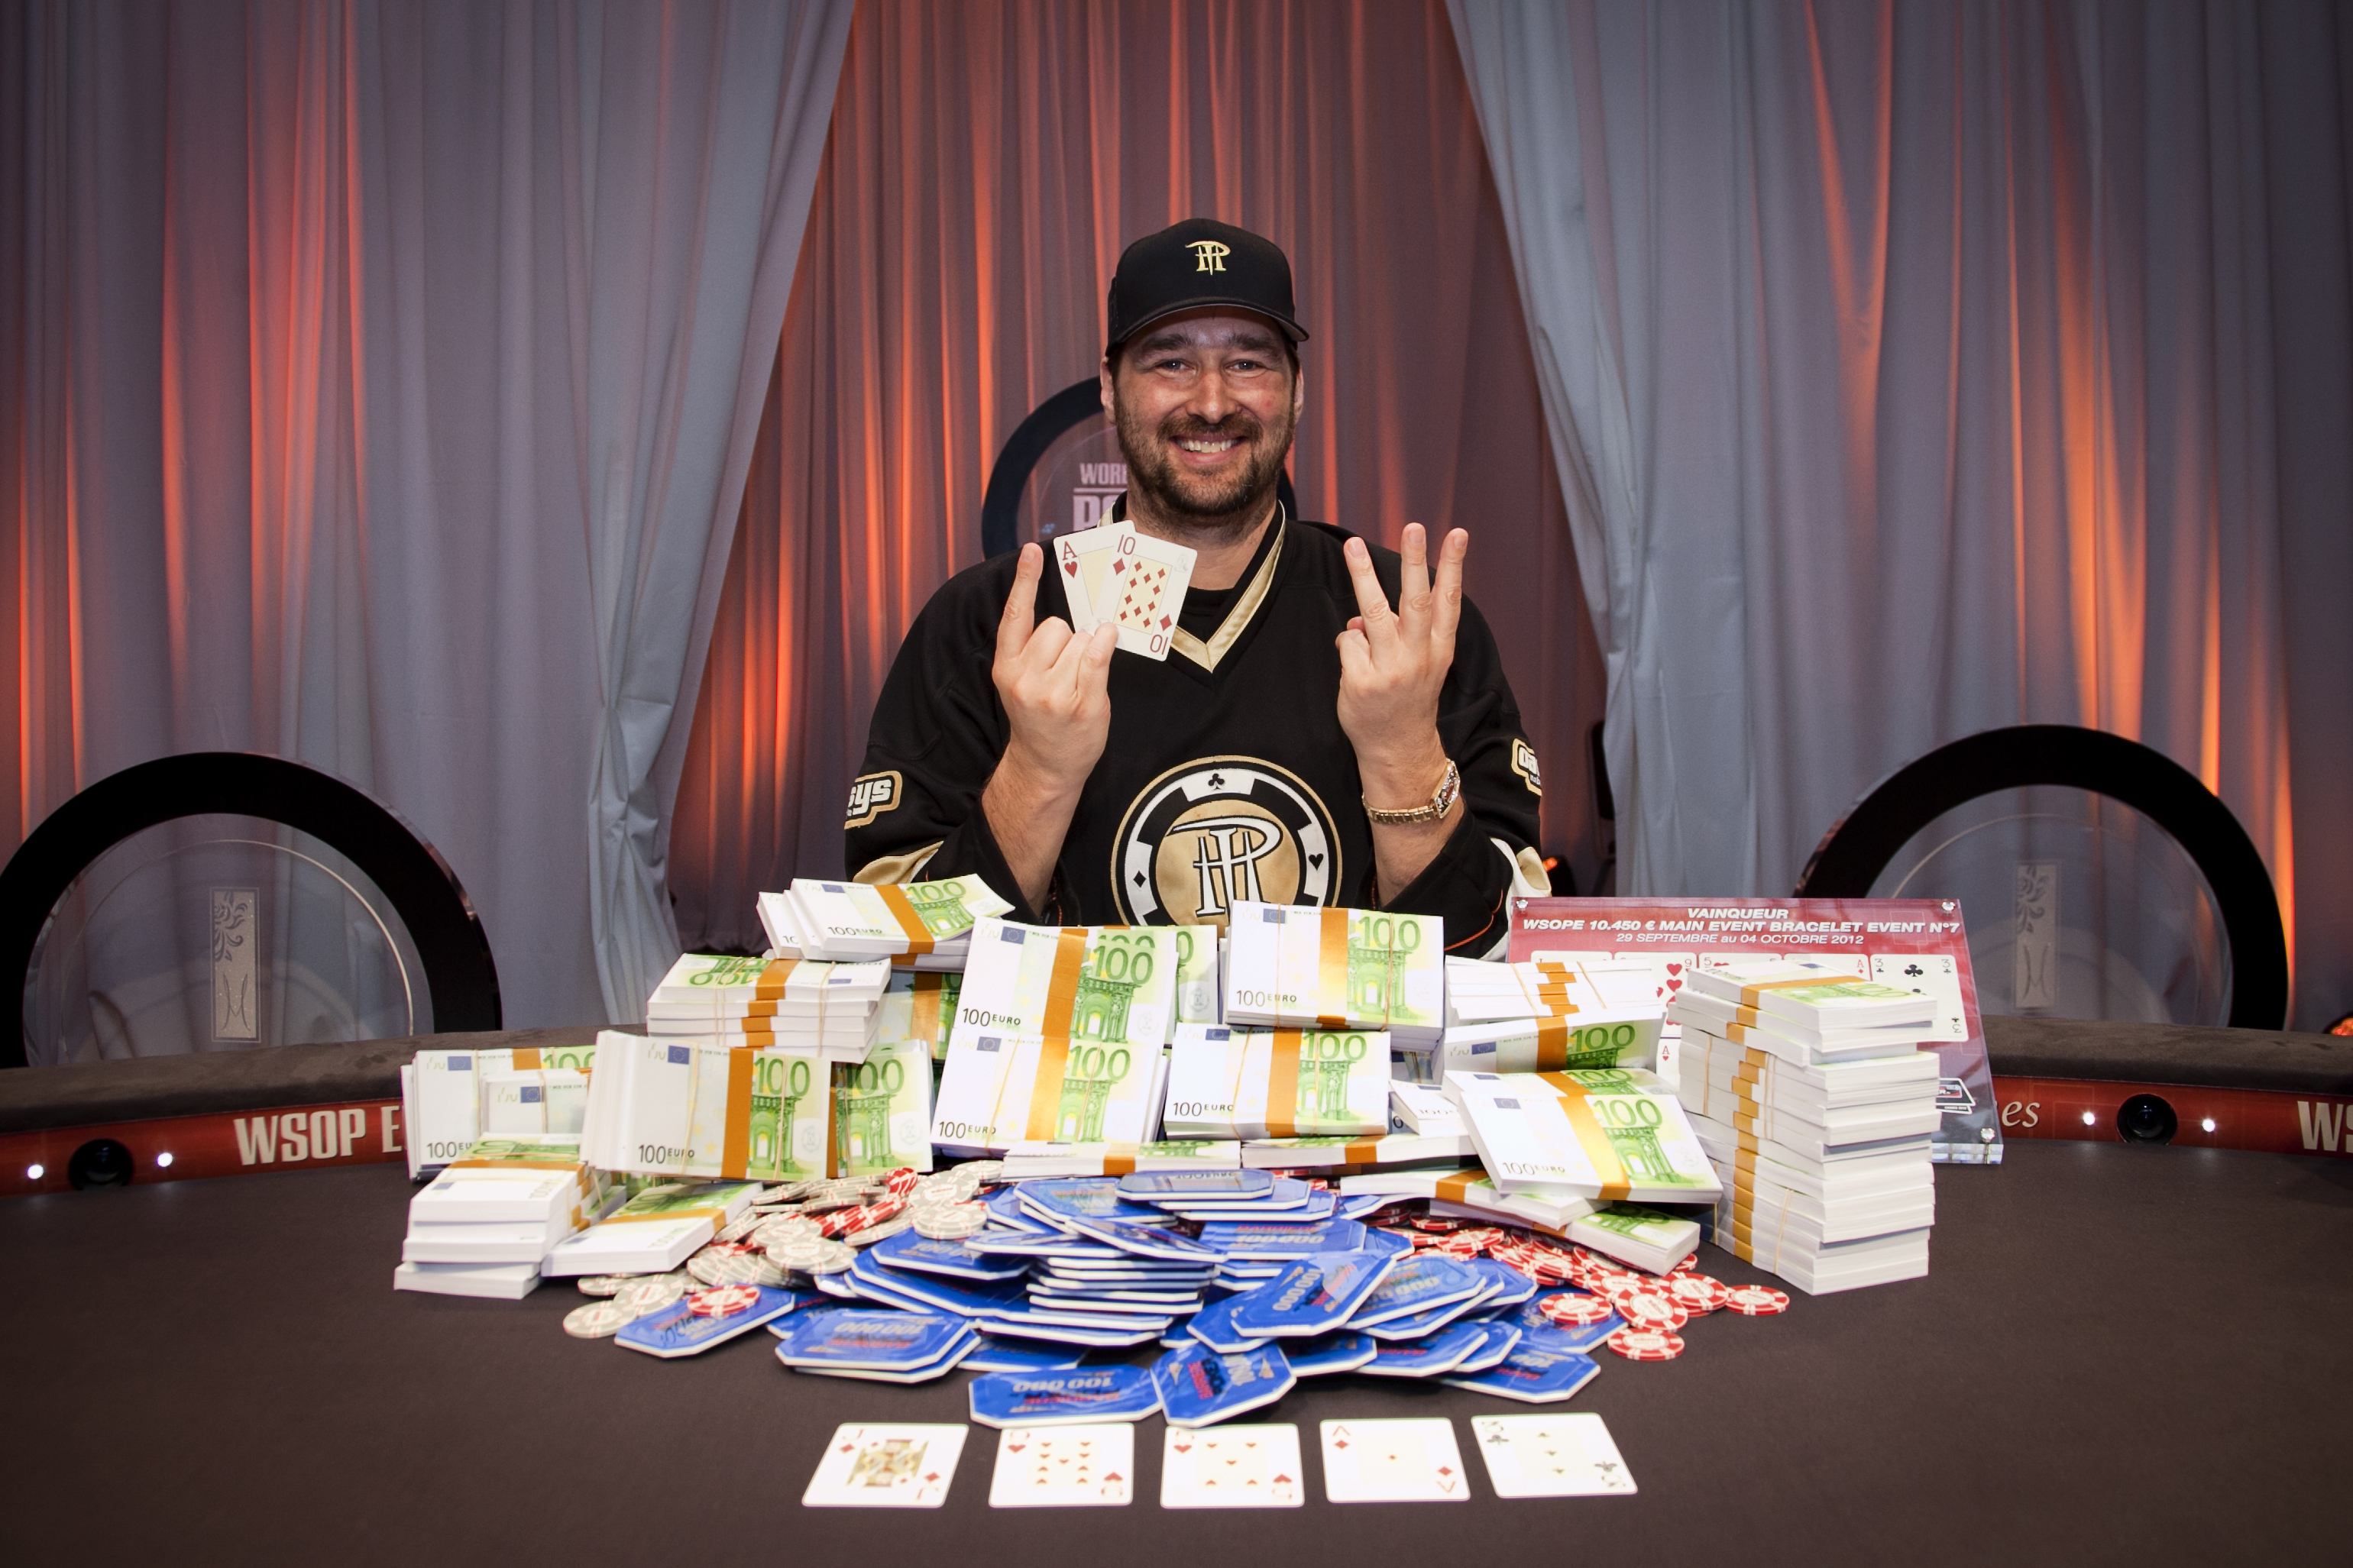 The Hand I'll Never Forget: Hellmuth's 'White Magic' at 